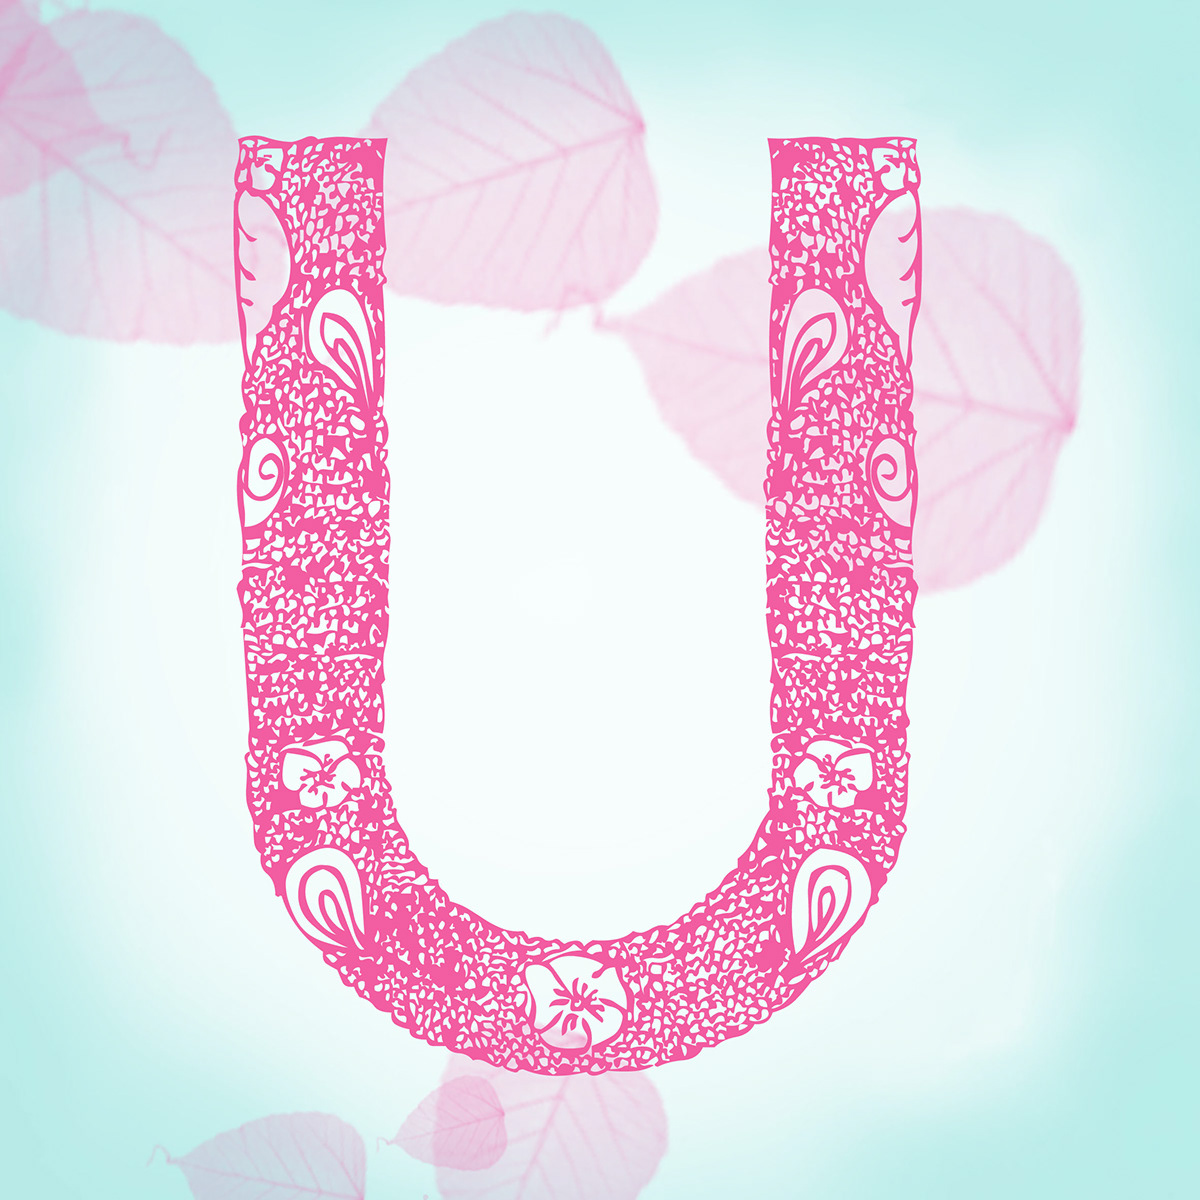 floral  futura handmade detailed font type Illustrator photoshop letters